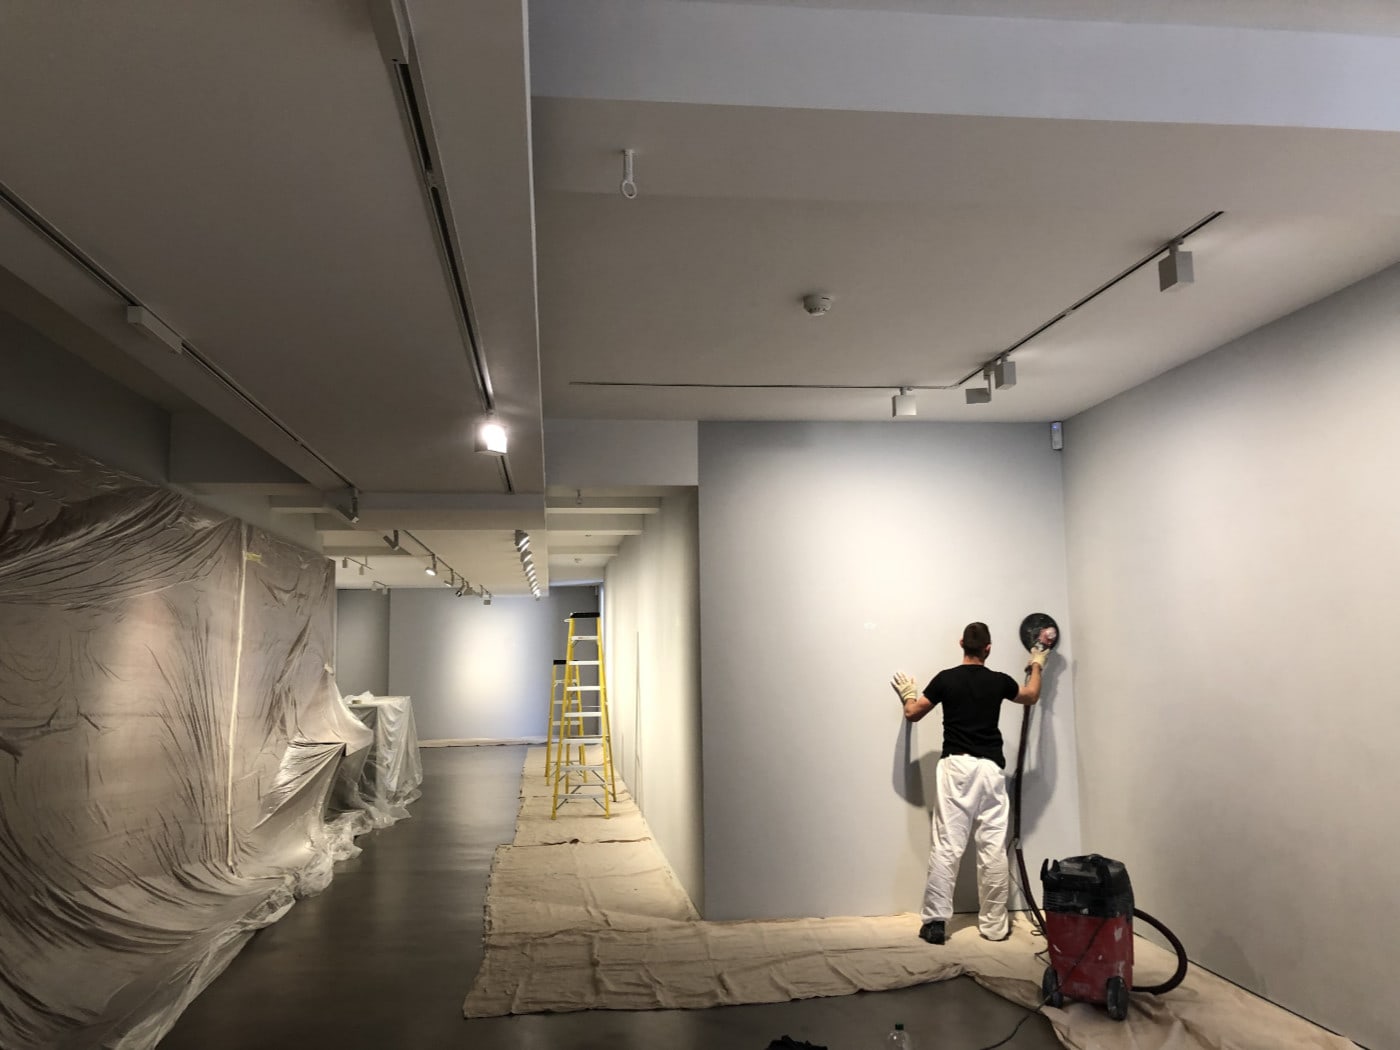 Commercial Painting and Decorating in London